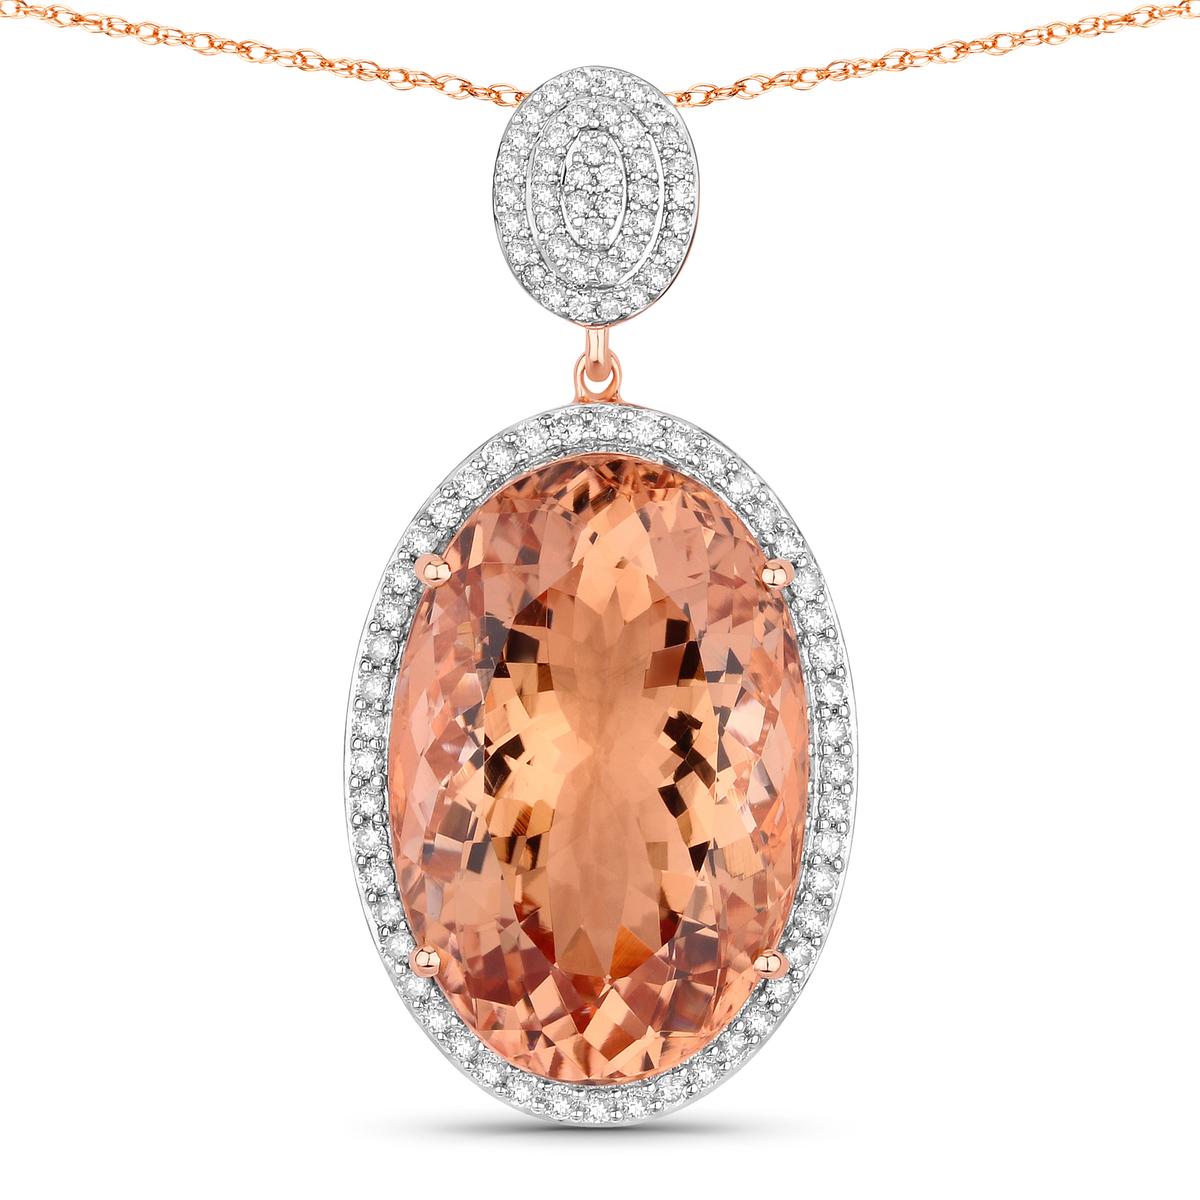 14KT Rose Gold 23.83ct Morganite and Diamond Pendant with Chain